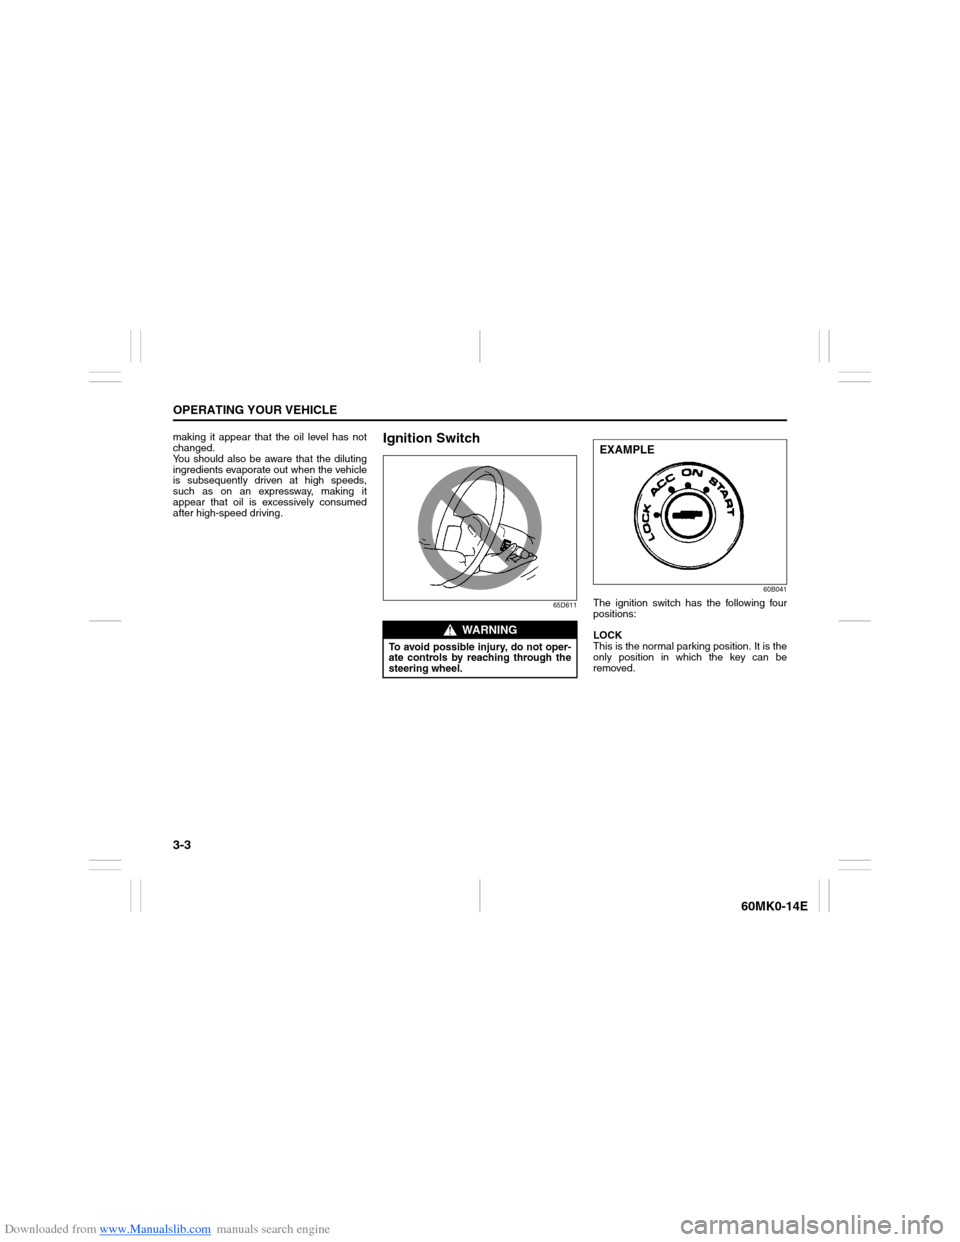 SUZUKI ERTIGA 2013 1.G Service Manual Downloaded from www.Manualslib.com manuals search engine 3-3OPERATING YOUR VEHICLE
60MK0-14E
making it appear that the oil level has not
changed.
You should also be aware that the diluting
ingredients